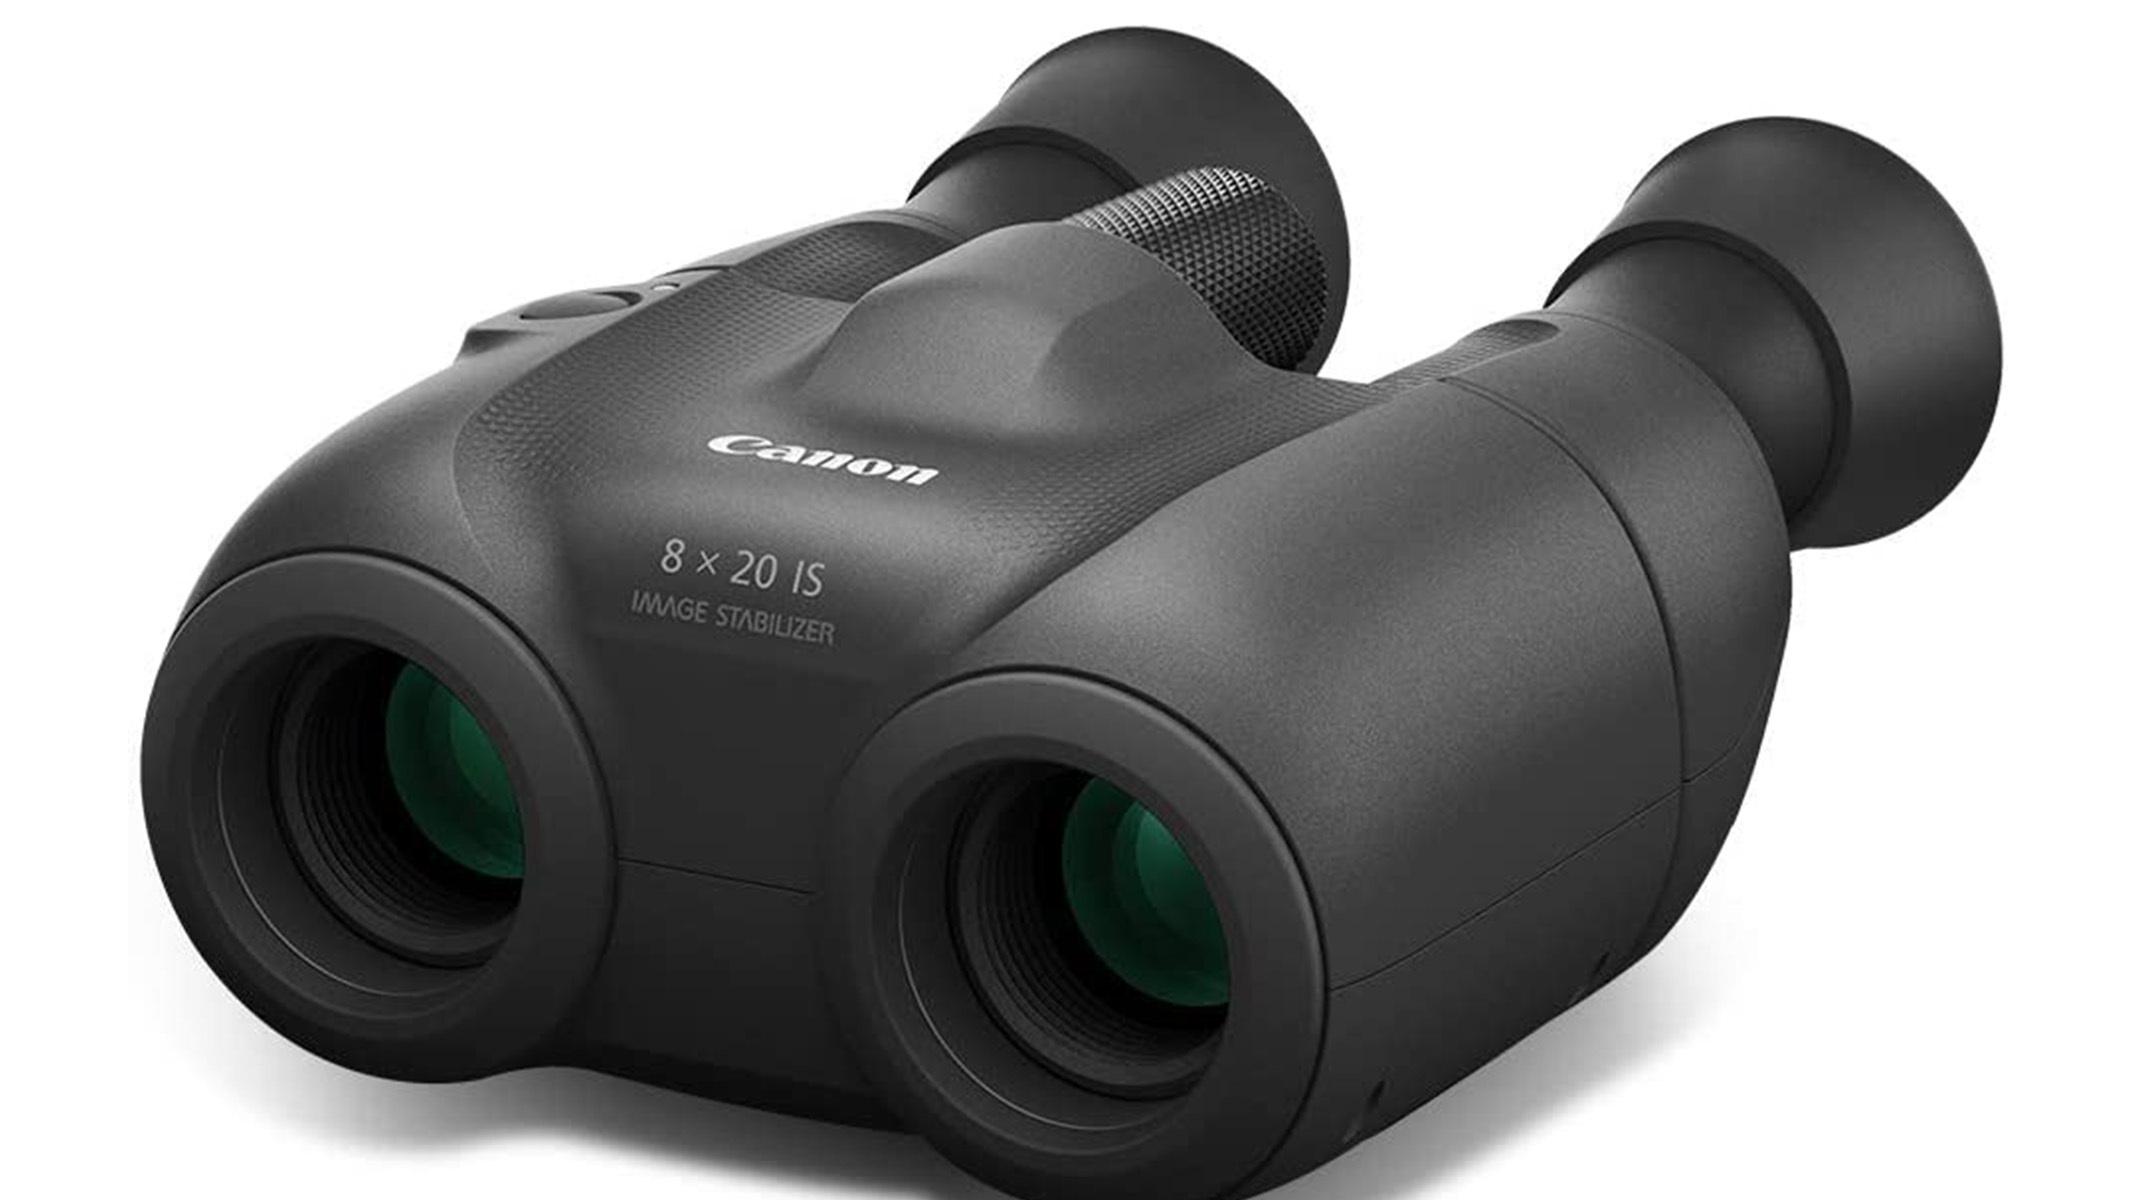 $50 off the Canon 8x20IS binoculars plus a free gift